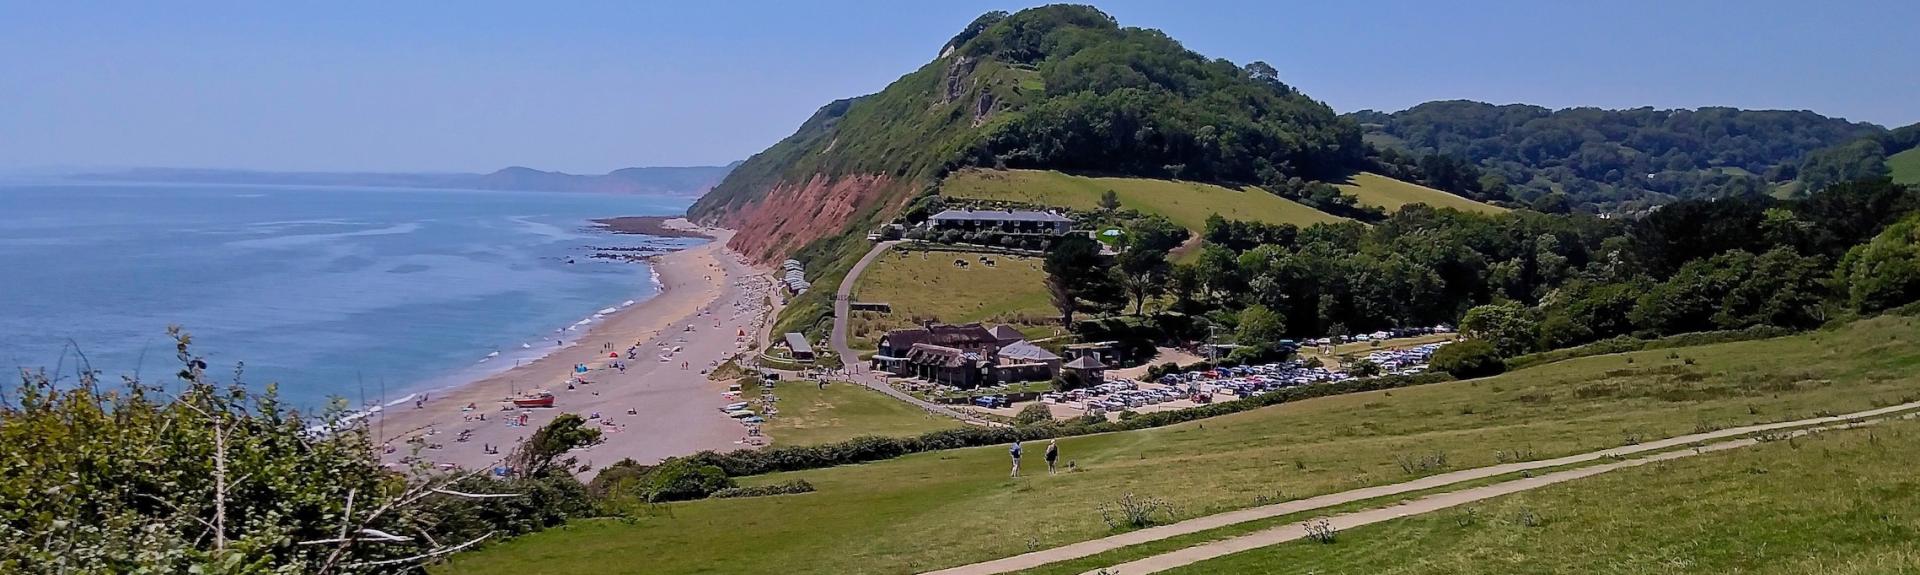 Branscombe beach in Devon. A field slopes down to a cluster of sea shanties overlooking a wide shingle beach, beyond which the lad rises to form cliffs topped by woodland. 